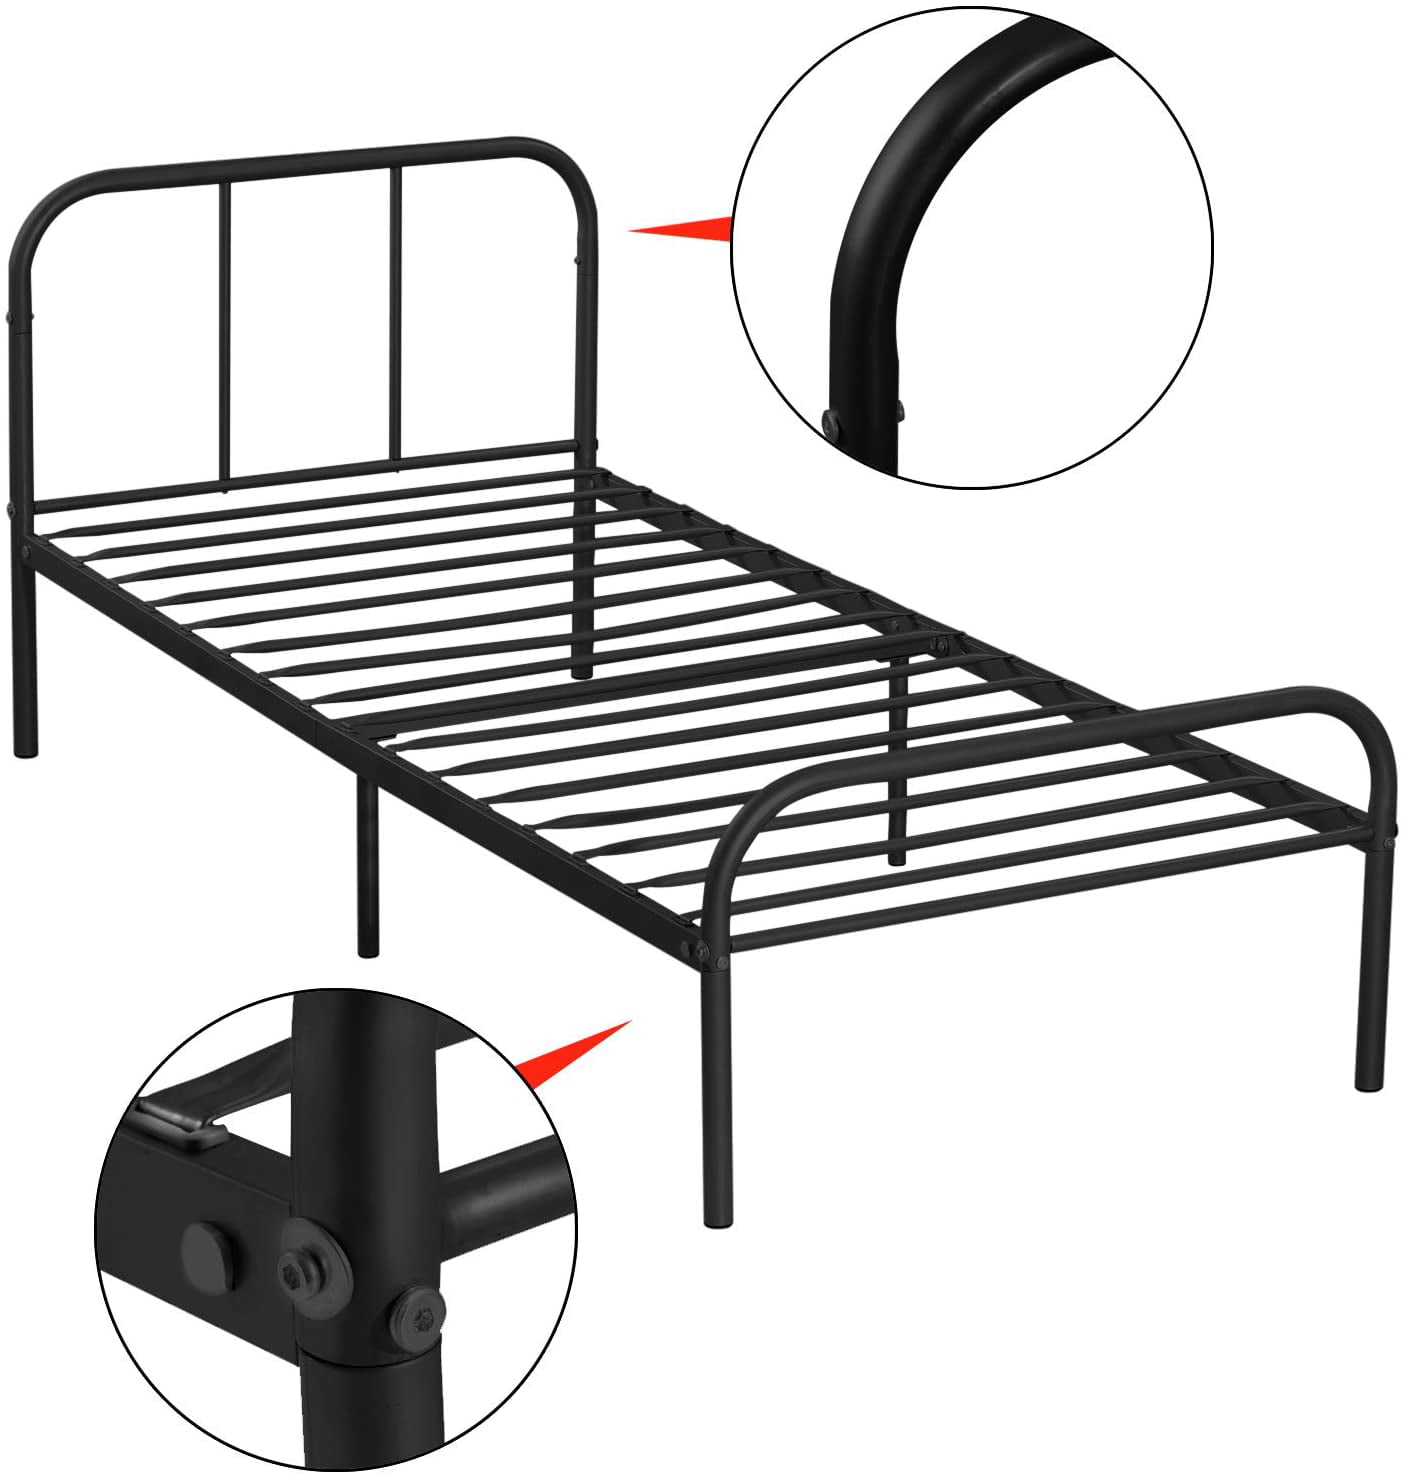 Voilamart Twin Metal Bed Frames with Headboard and Footboard, Single 6 Legs Bed Frame Platform Mattress Foundation for Kids Adult, No Box Springs Need, Black/Silver/White